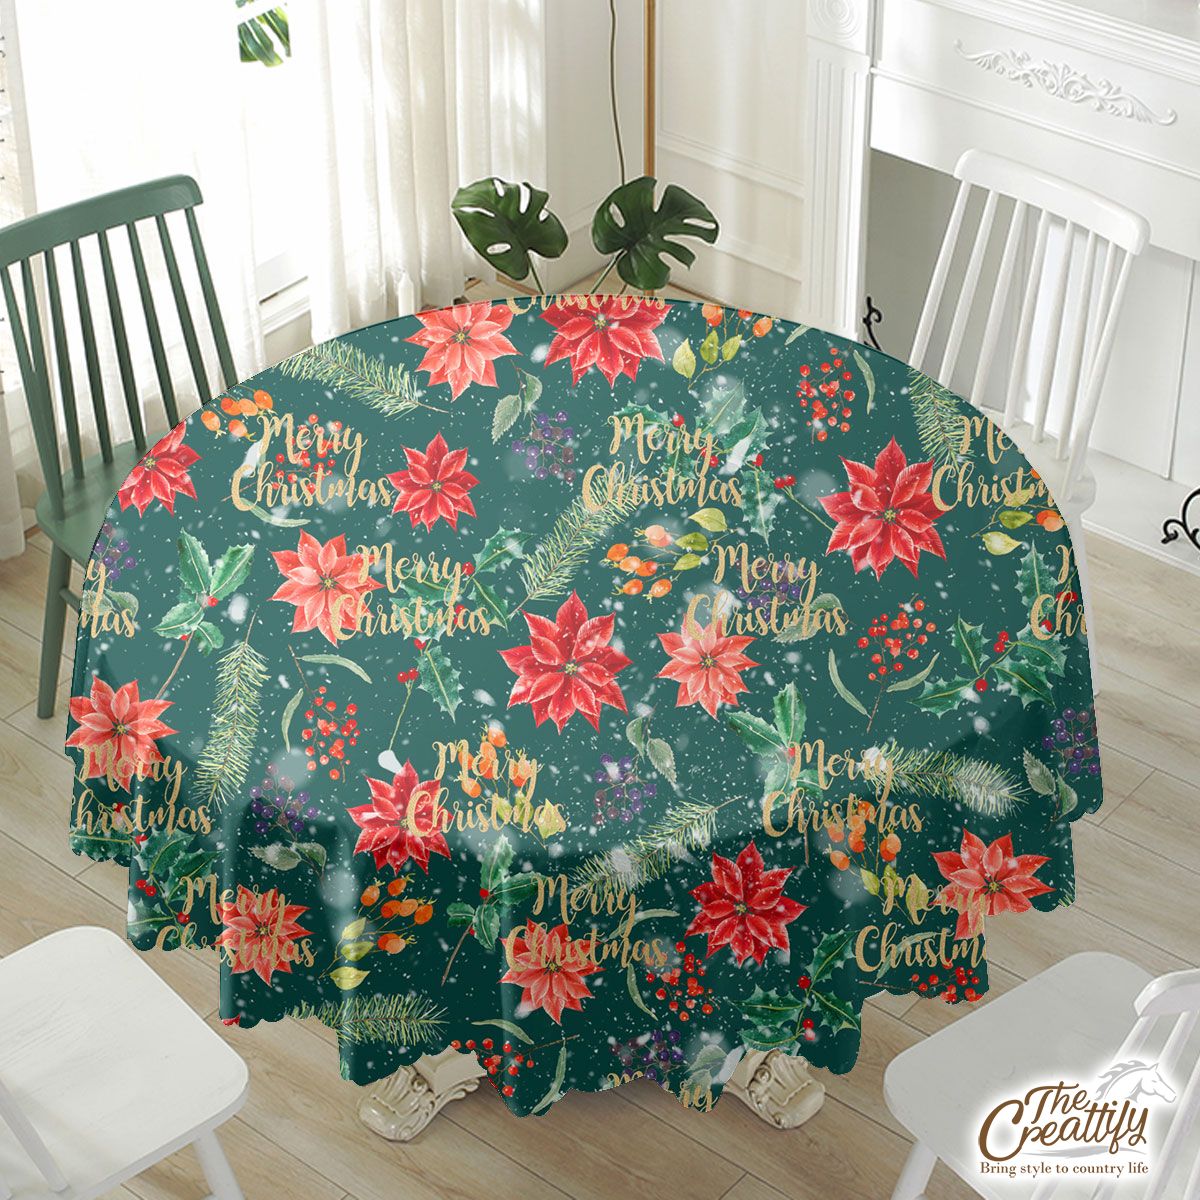 Christmas Poinsettia, Holly Leaf, Holly Berries With Snowflake Waterproof Tablecloth